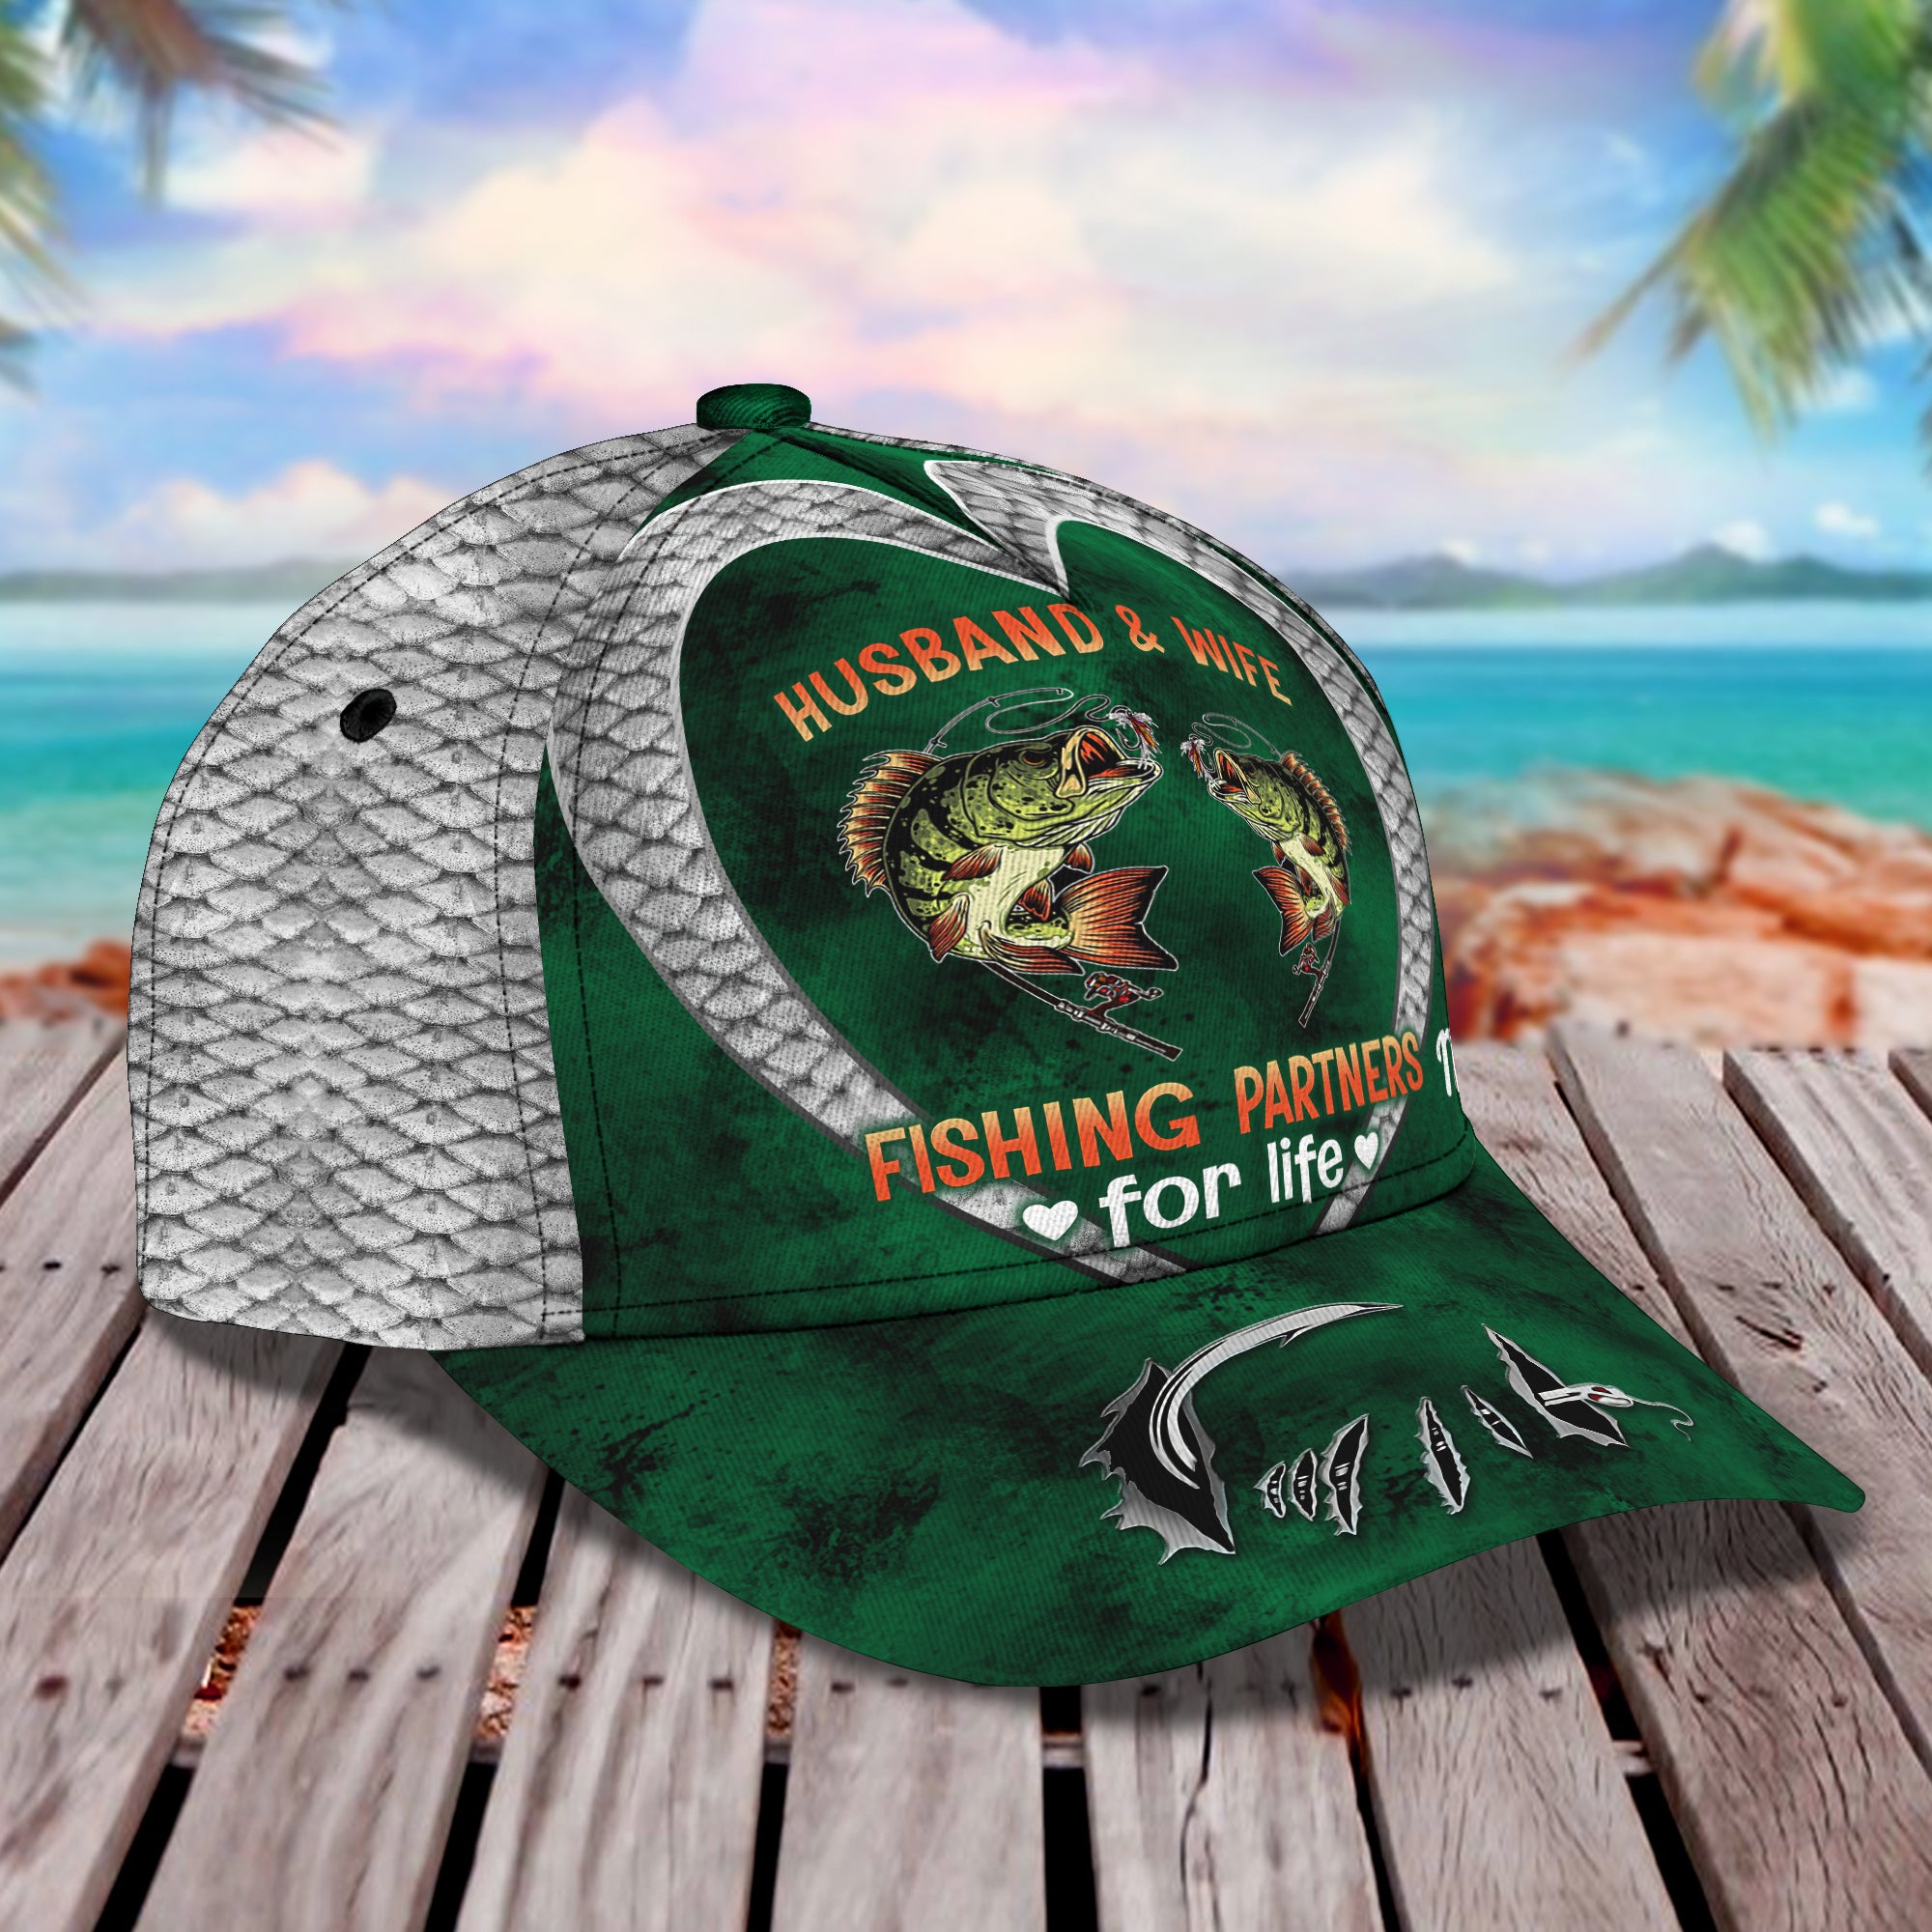 Husband & Wife Fishing Partners For Life - Personalized Name Cap 34 - Tad